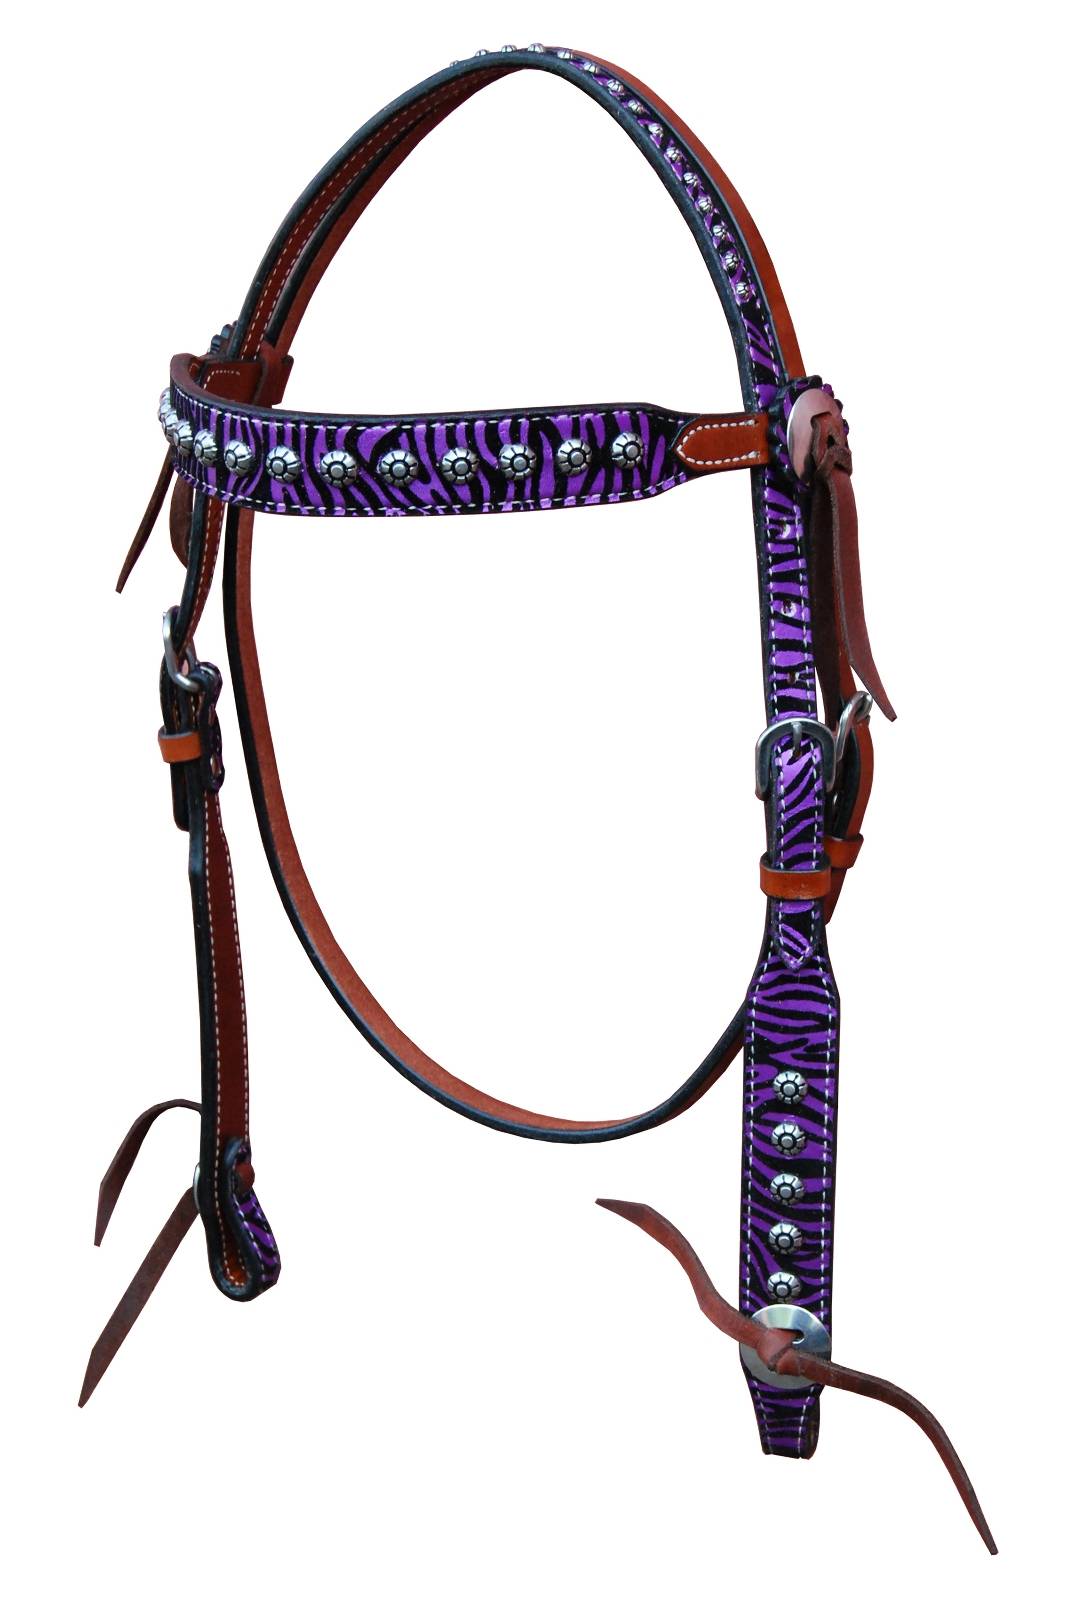 468856PUR HRSE Turn-Two Browband Headstall - Chasing Wild sku 468856PUR HRSE